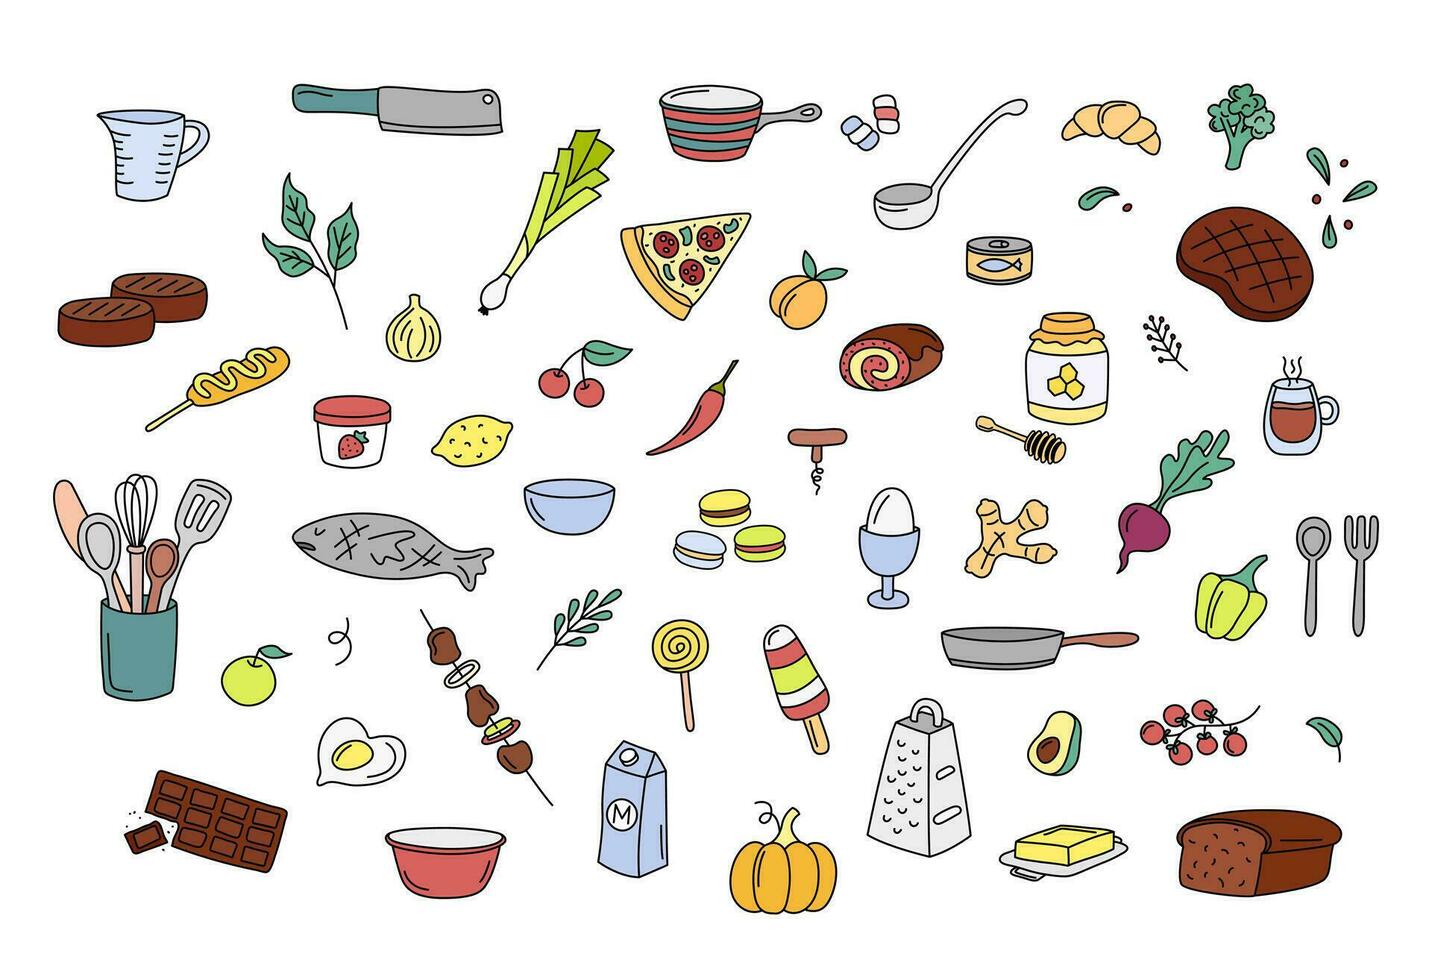 Cooking doodles, kitchen elements vector set. Cute colorful doodle illustrations collection of utensils, kitchenware, food, meal ingredients. Outline fruits, vegetables, bakery, cookware